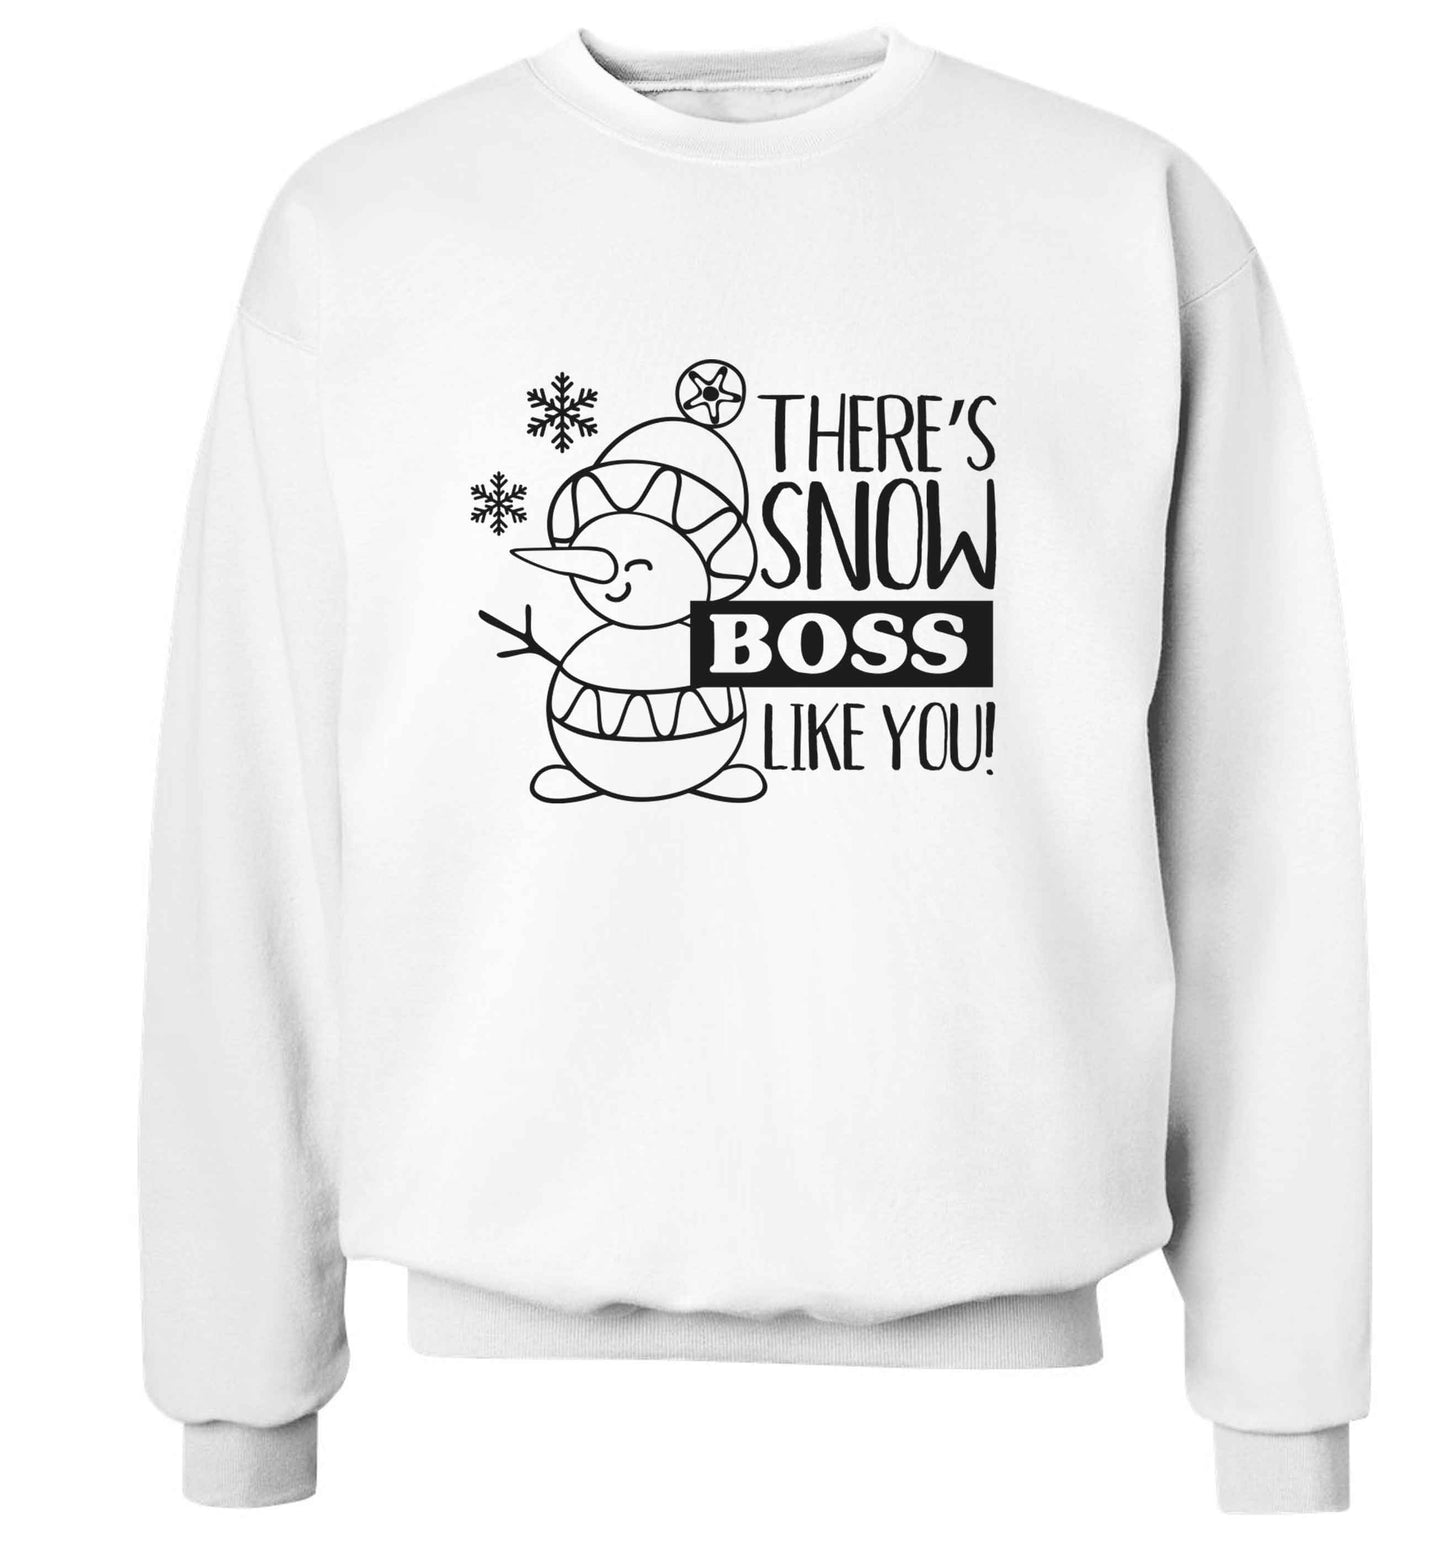 There's snow boss like you adult's unisex white sweater 2XL